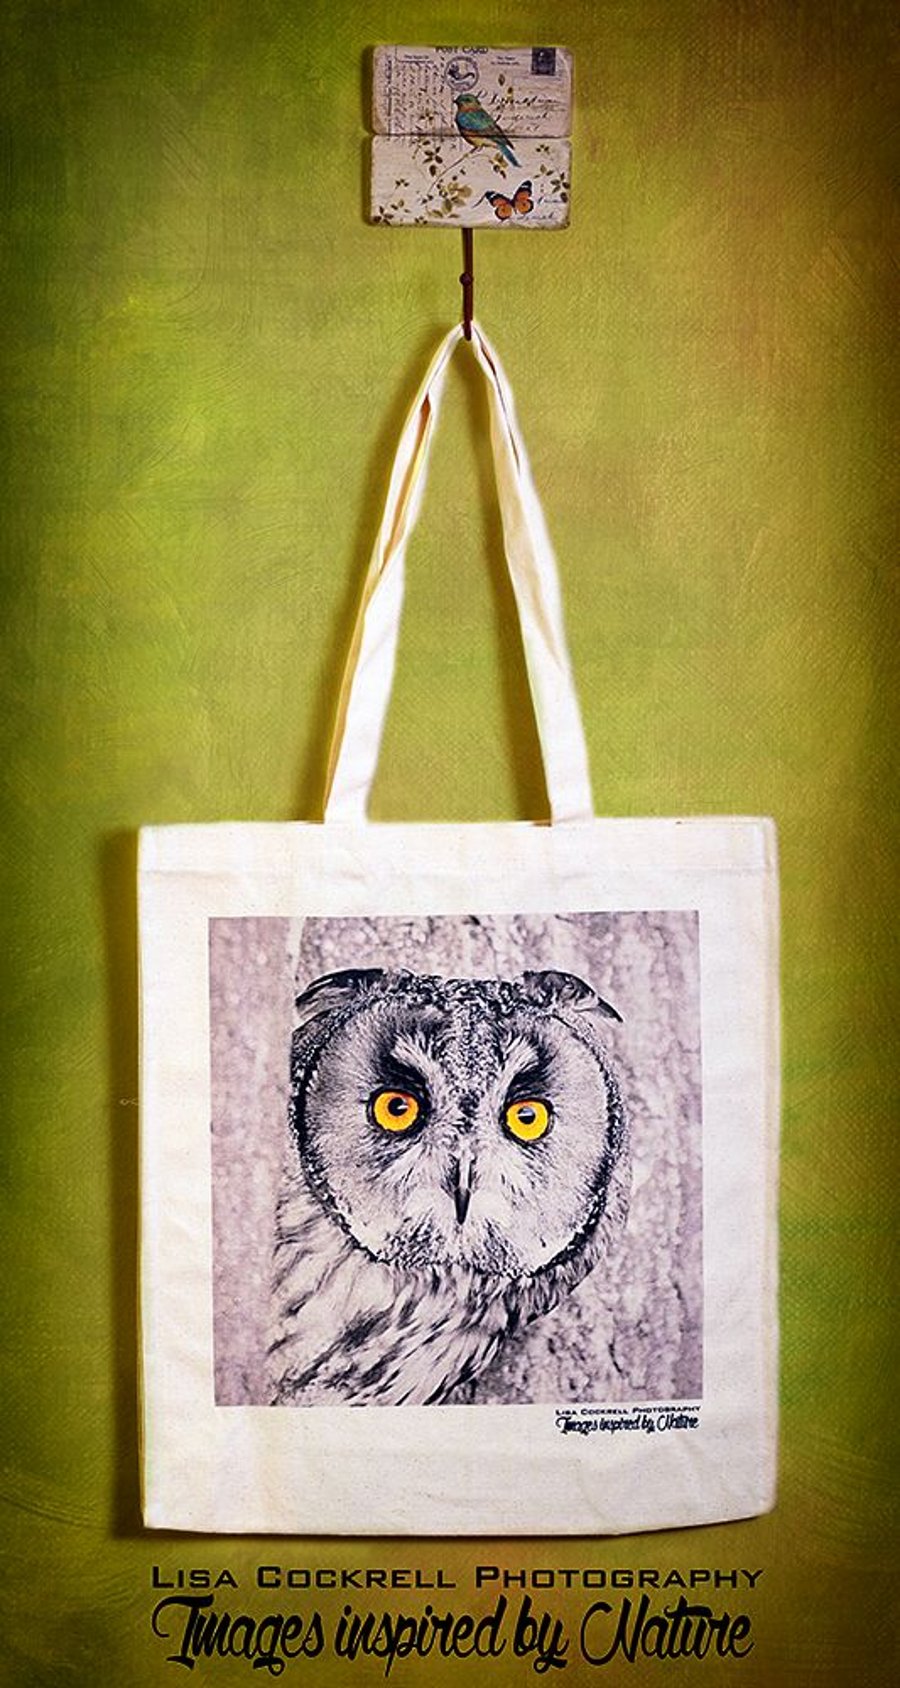 OWL STARE - TOTE BAGS INSPIRED BY NATURE FROM LISA COCKRELL PHOTOGRAPHY